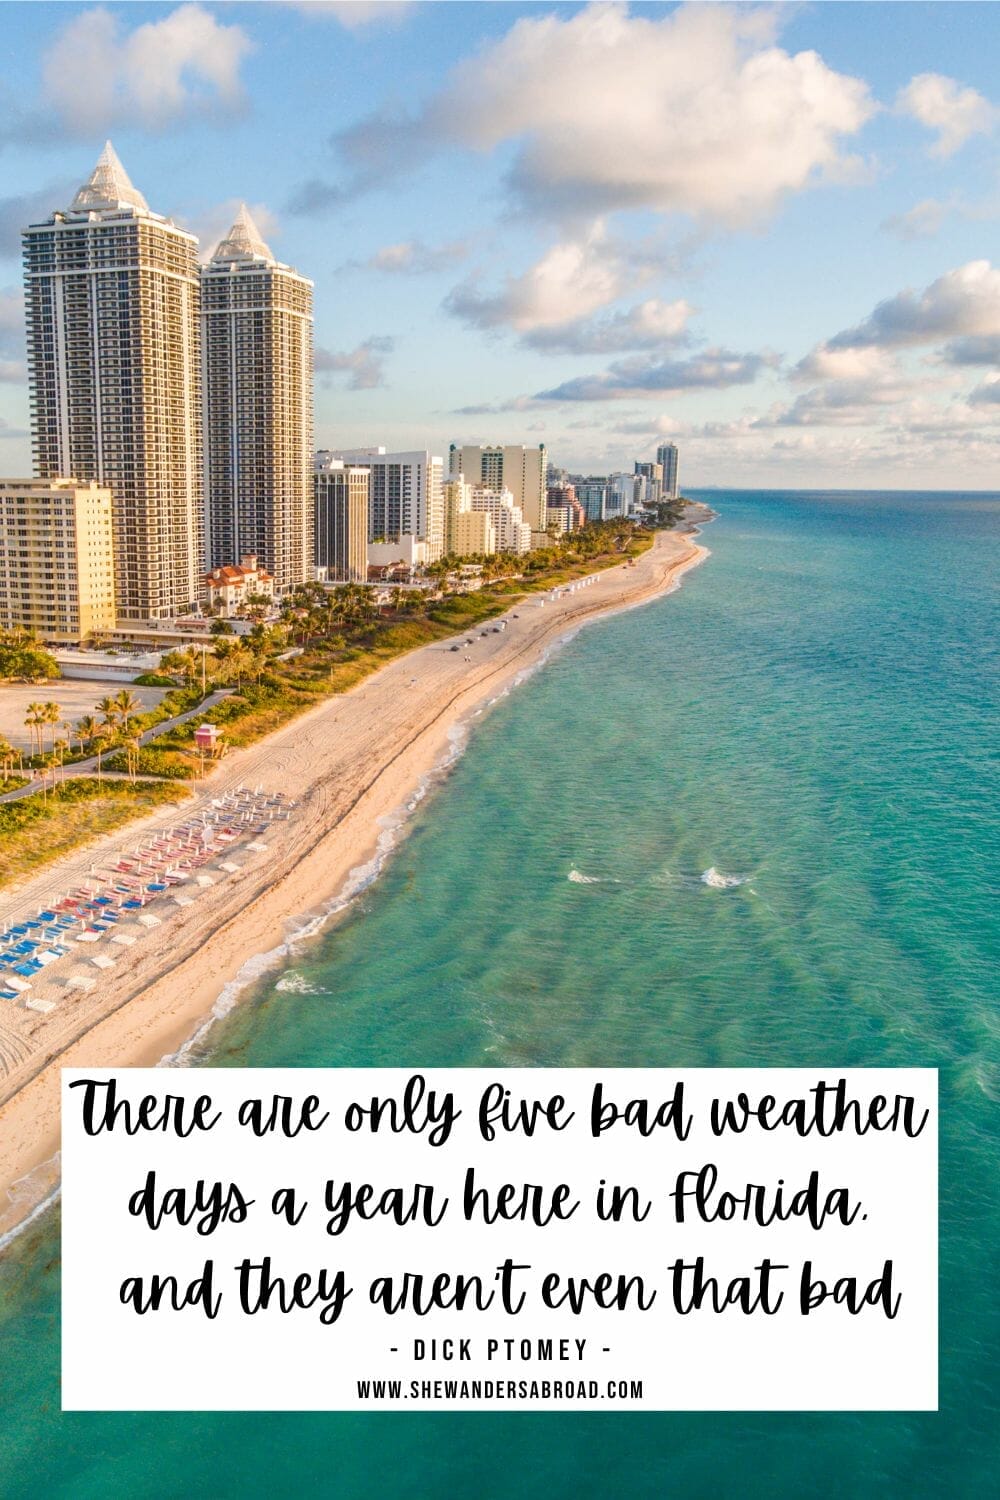 Motivational Florida Quotes for Instagram